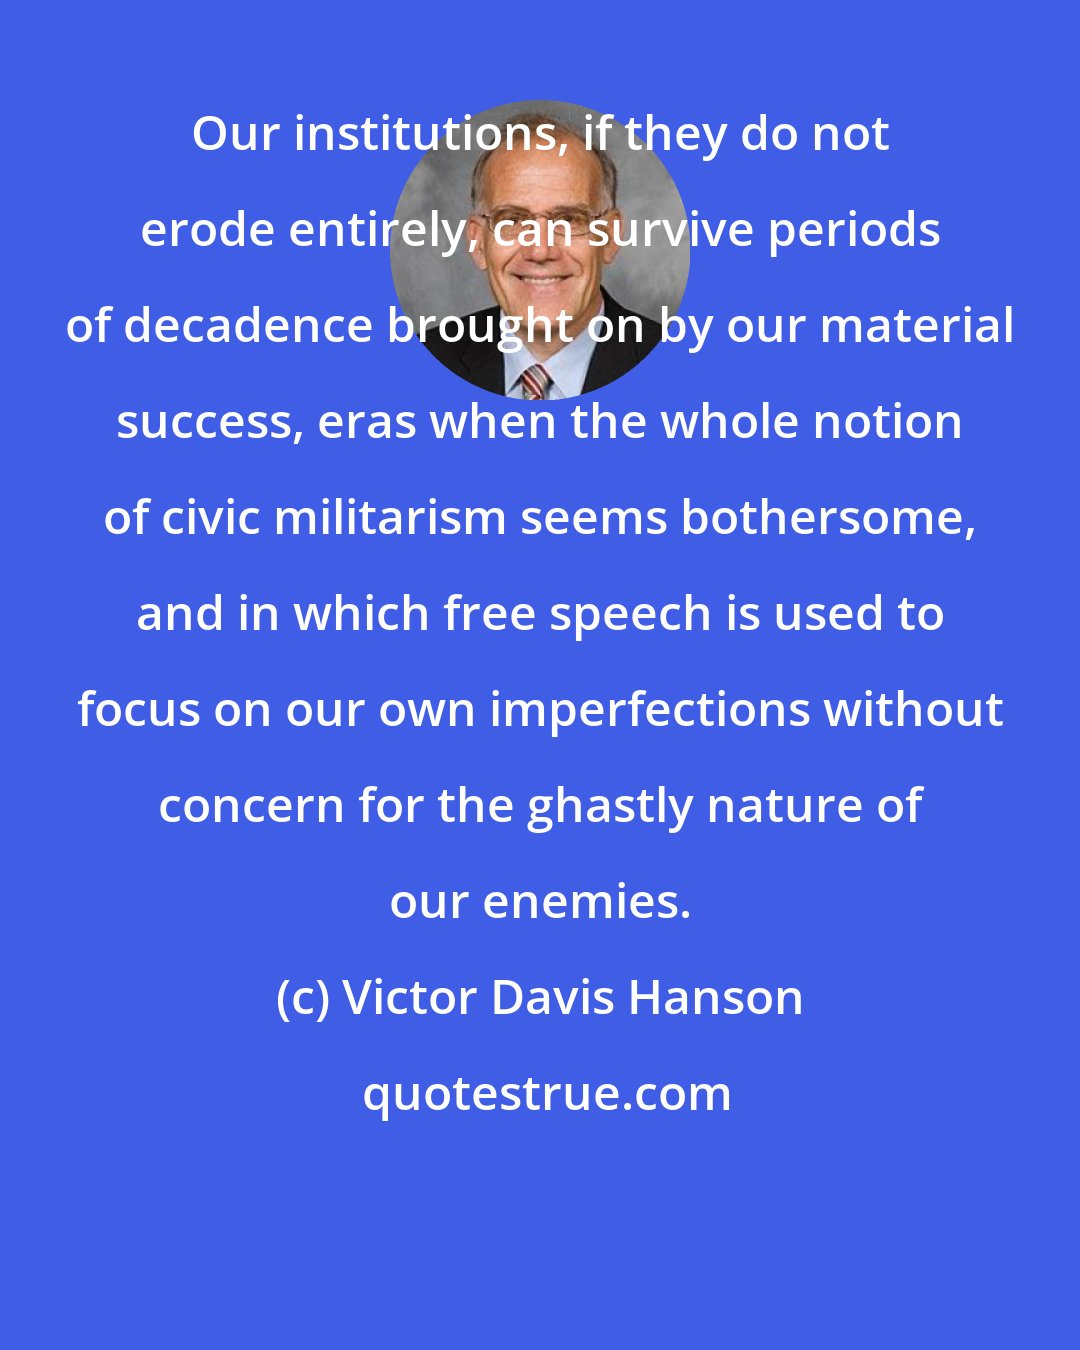 Victor Davis Hanson: Our institutions, if they do not erode entirely, can survive periods of decadence brought on by our material success, eras when the whole notion of civic militarism seems bothersome, and in which free speech is used to focus on our own imperfections without concern for the ghastly nature of our enemies.